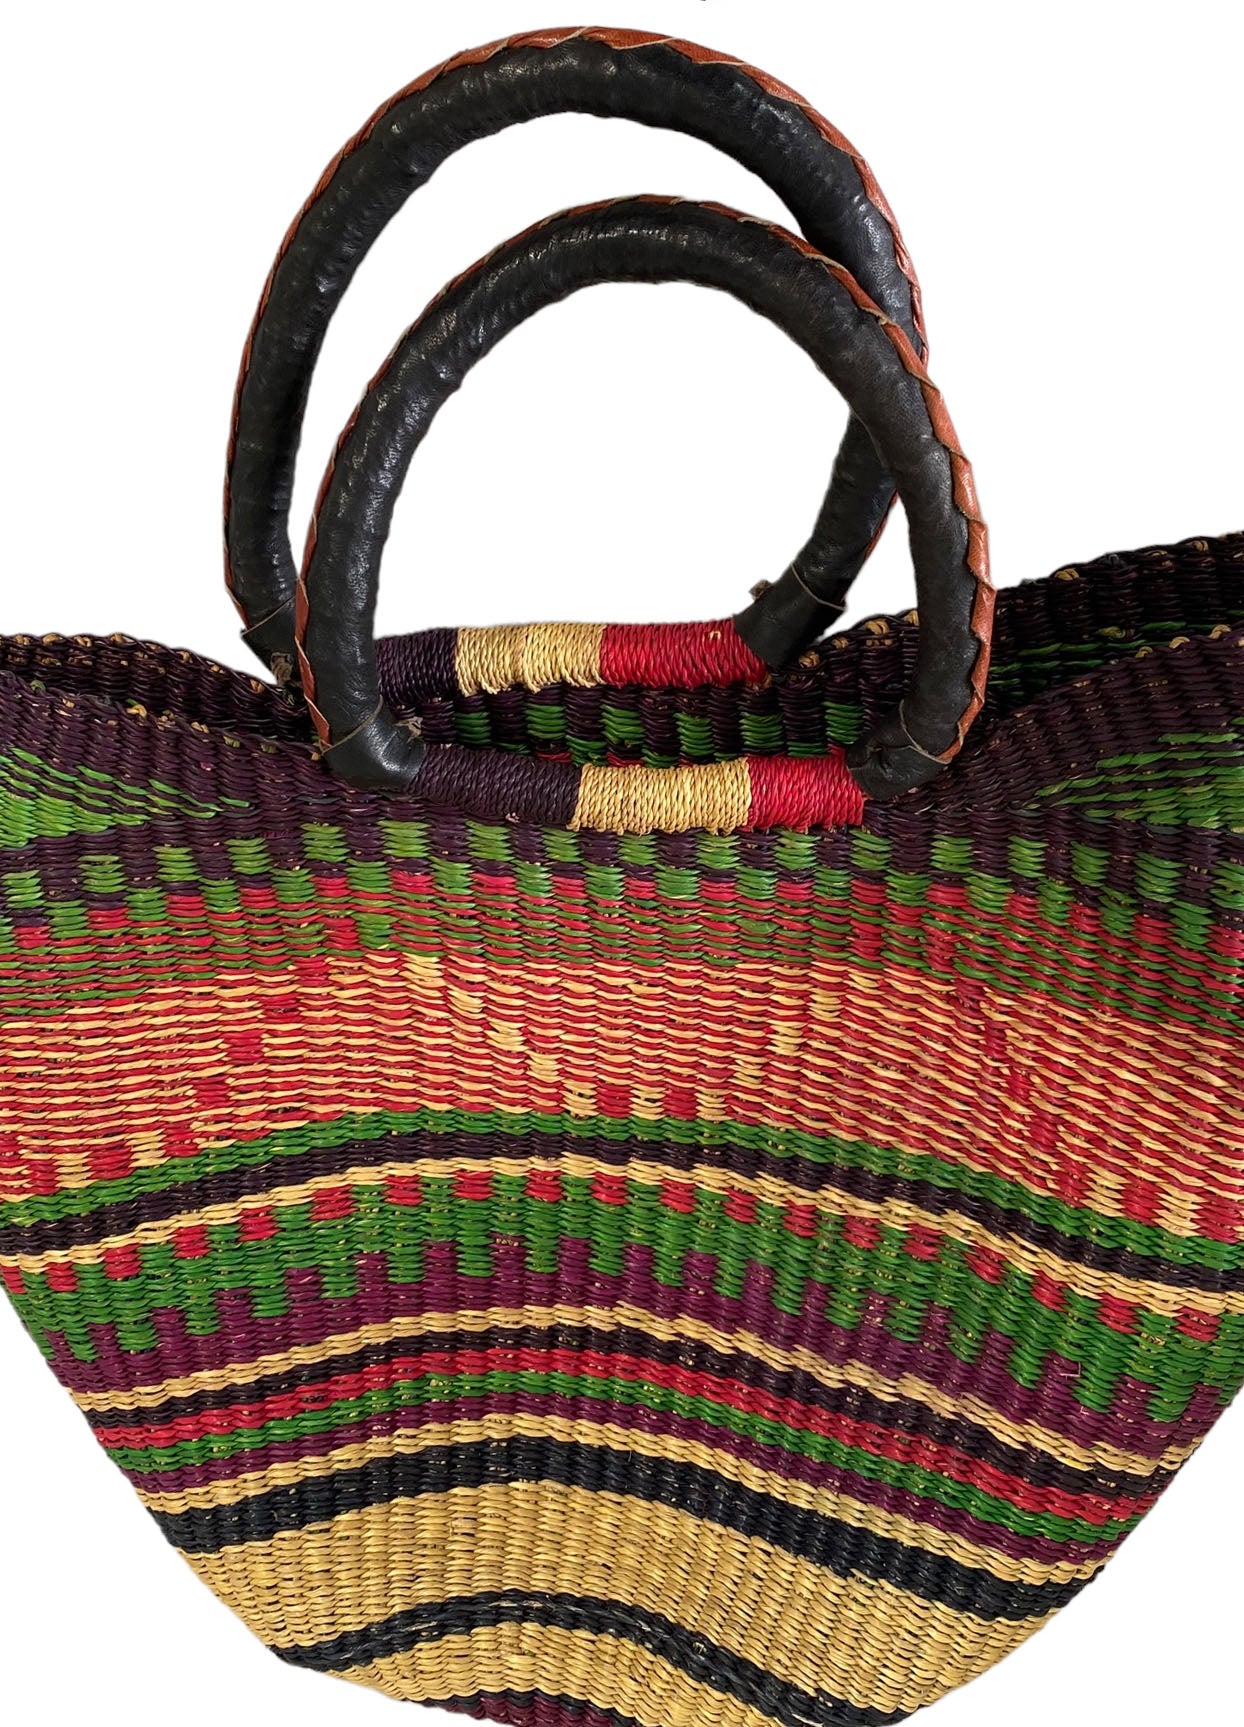 #5384 Large Colorful Saint -Tropez Style African Basket 18" H by 20" W